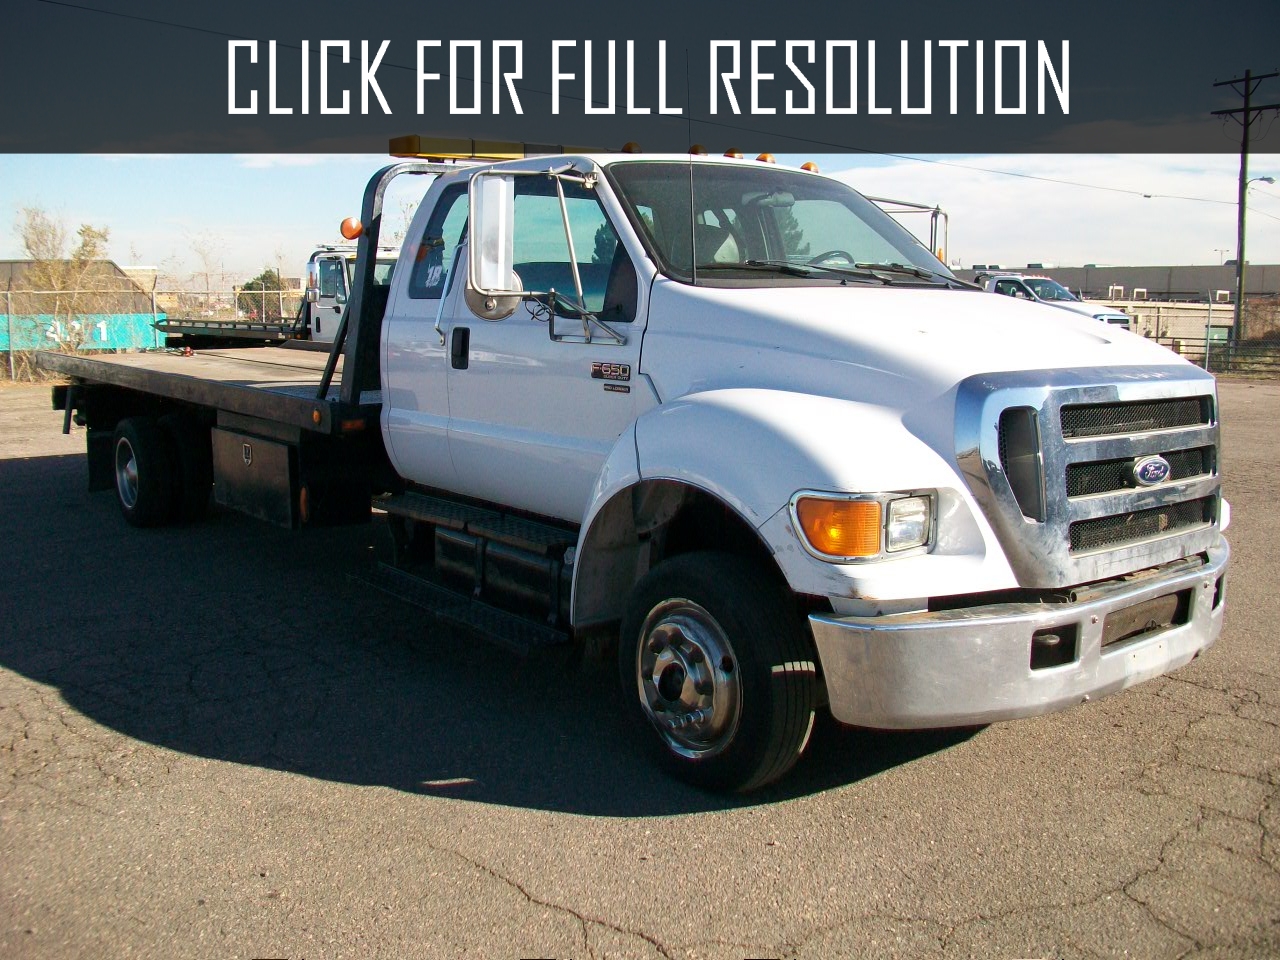 2004 Ford F650